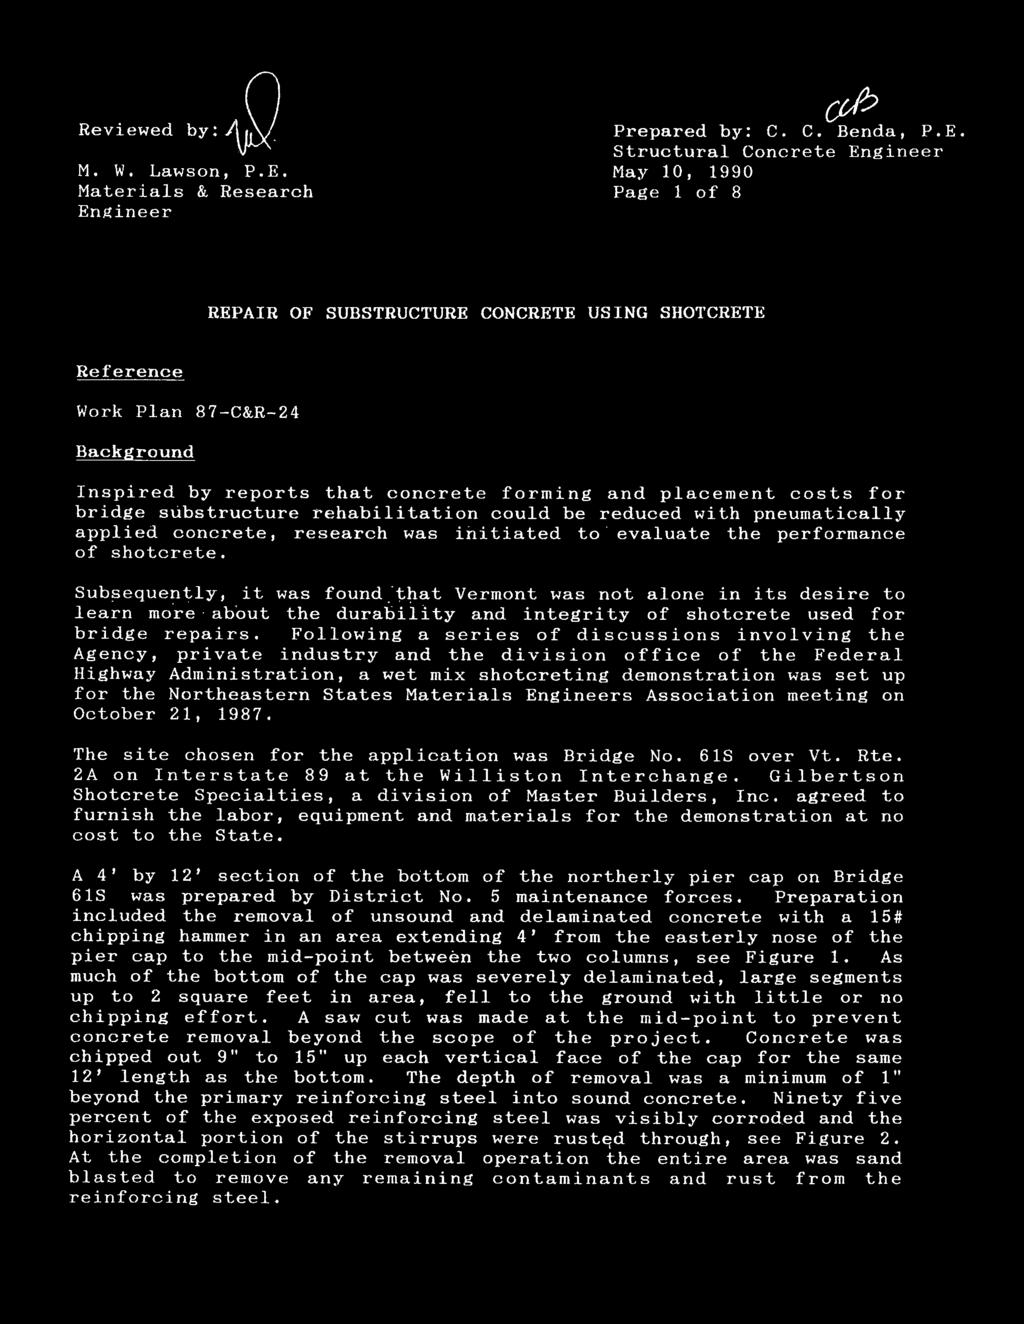 Structural Concrete Enginee r May 10, 1990 Page 1 of 8 RESEARCH UPDATE Number U90-07 REPAIR OF SUBSTRUCTURE CONCRETE USING SHOTCRETE Reference Work Plan 87-C&R-24 Background Inspired by reports that